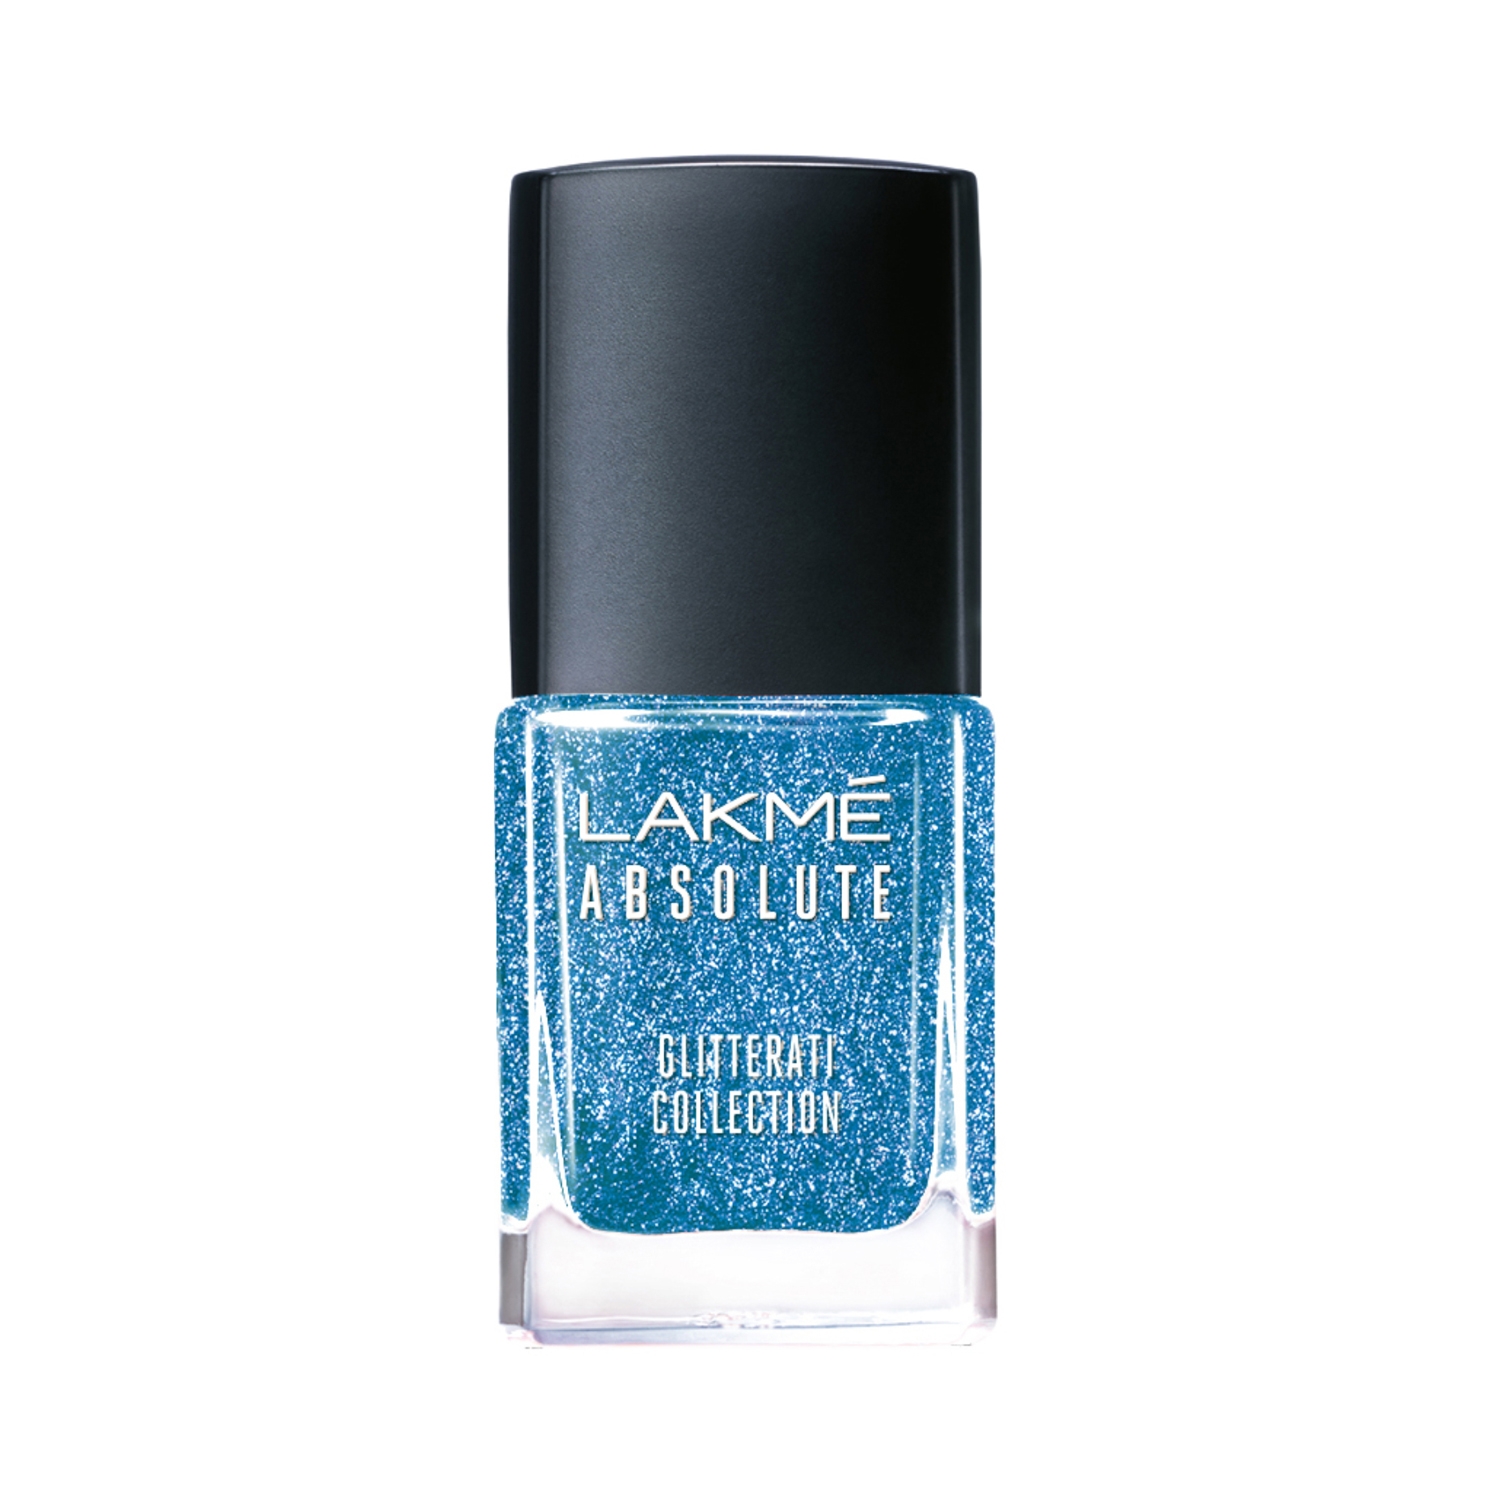 Buy Lakme Absolute - Gel Stylist Nail Colour, High Shine Formula, Glossy  Finish Online at Best Price of Rs 247.5 - bigbasket